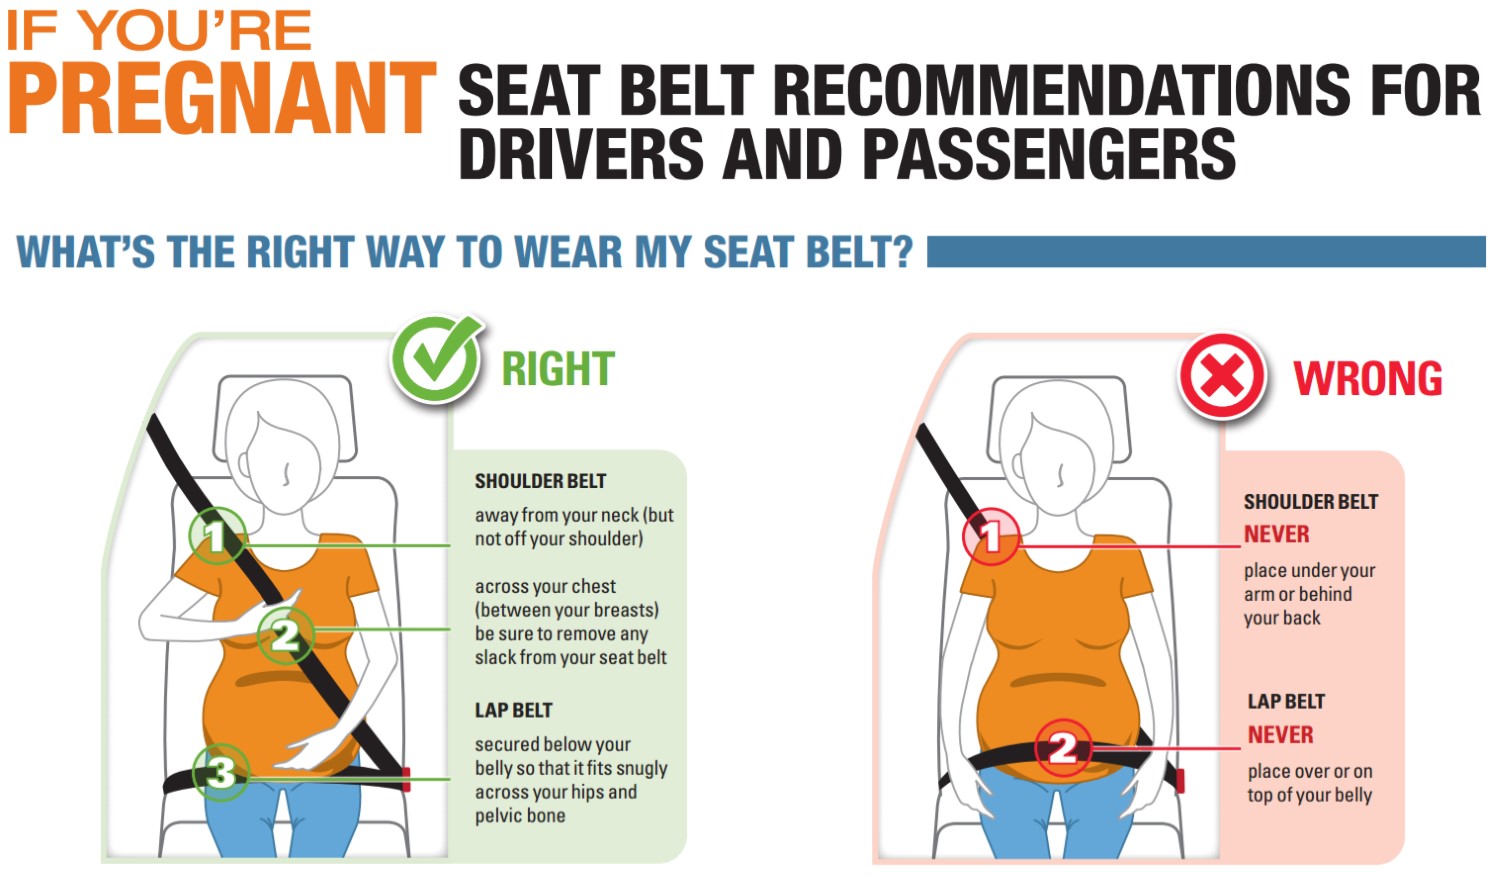 Pregnancy and seat belts